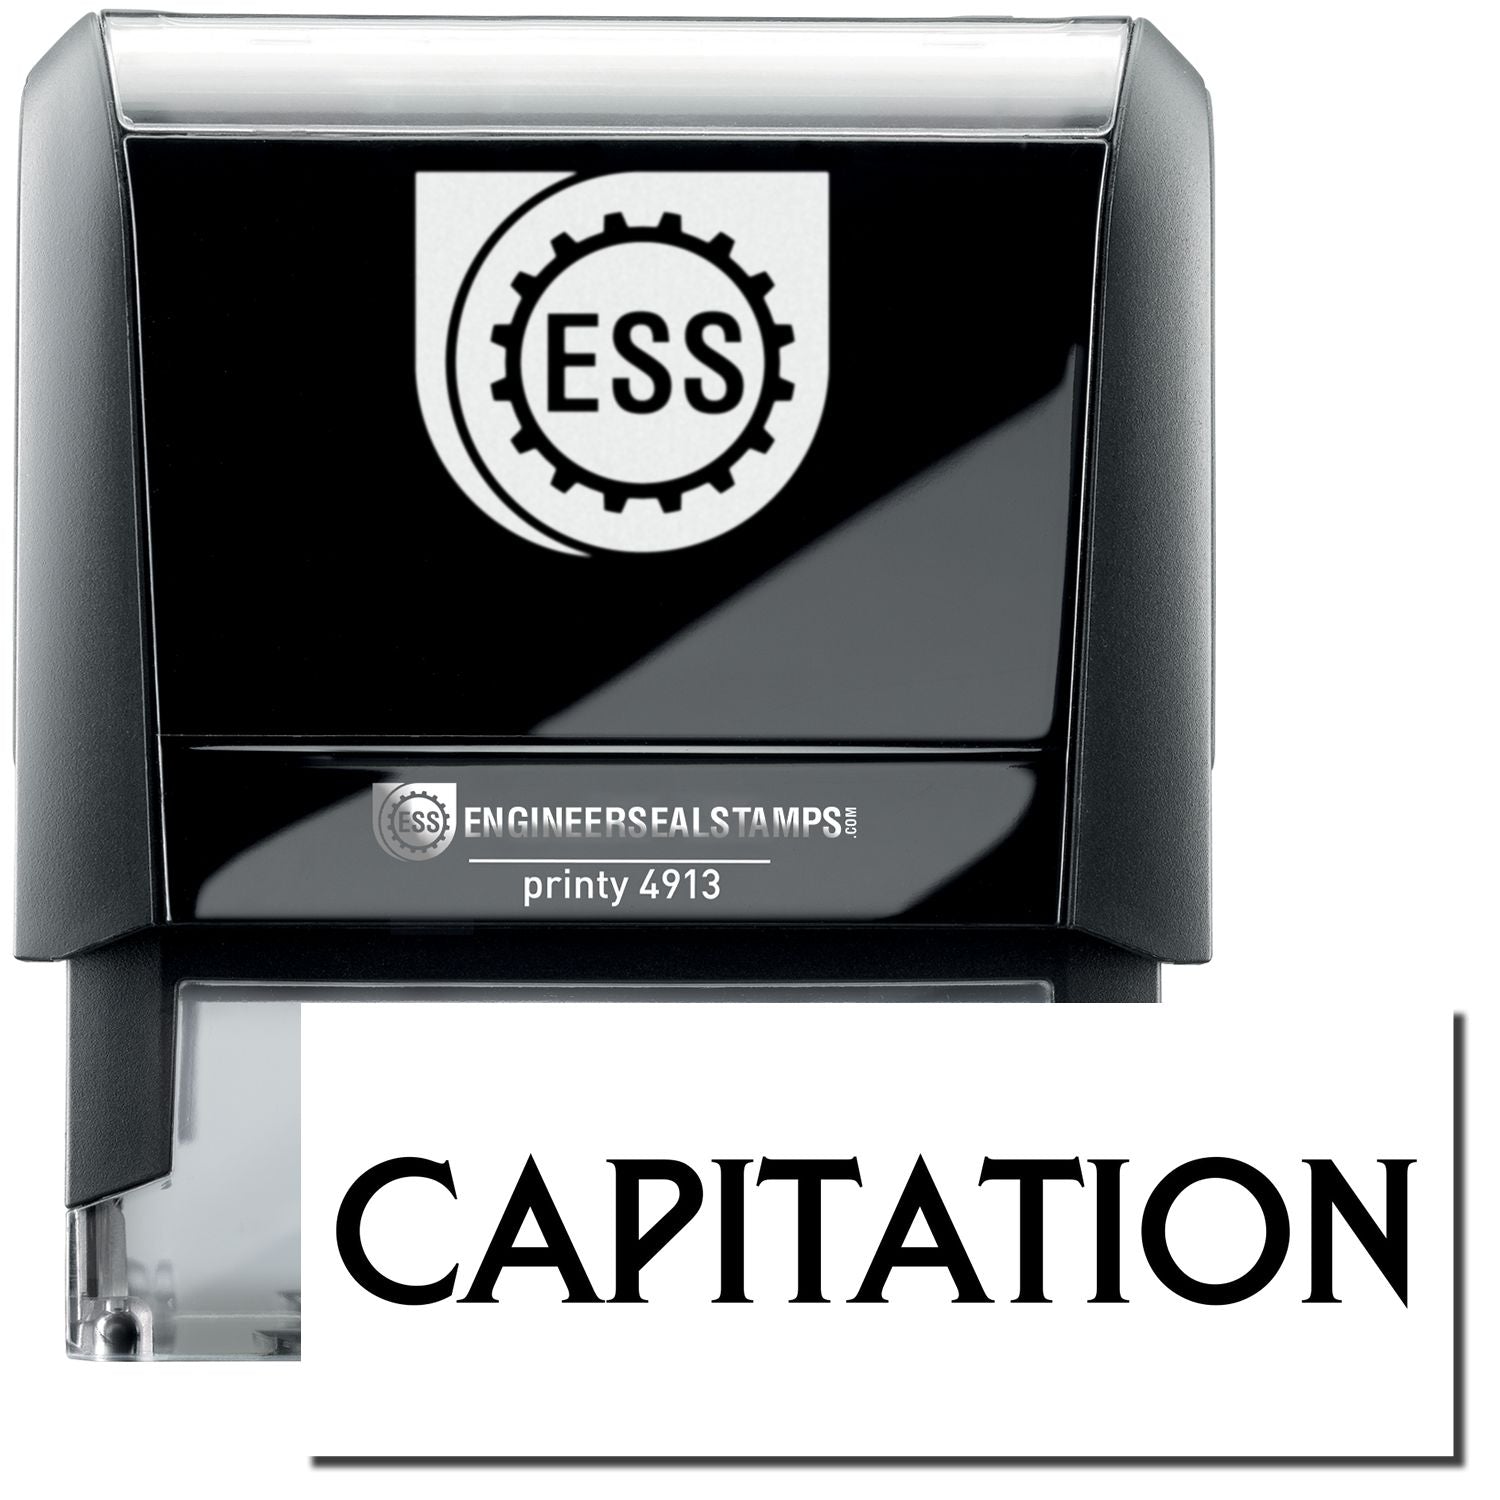 A self-inking stamp with a stamped image showing how the text "CAPITATION" in a large bold font is displayed by it.